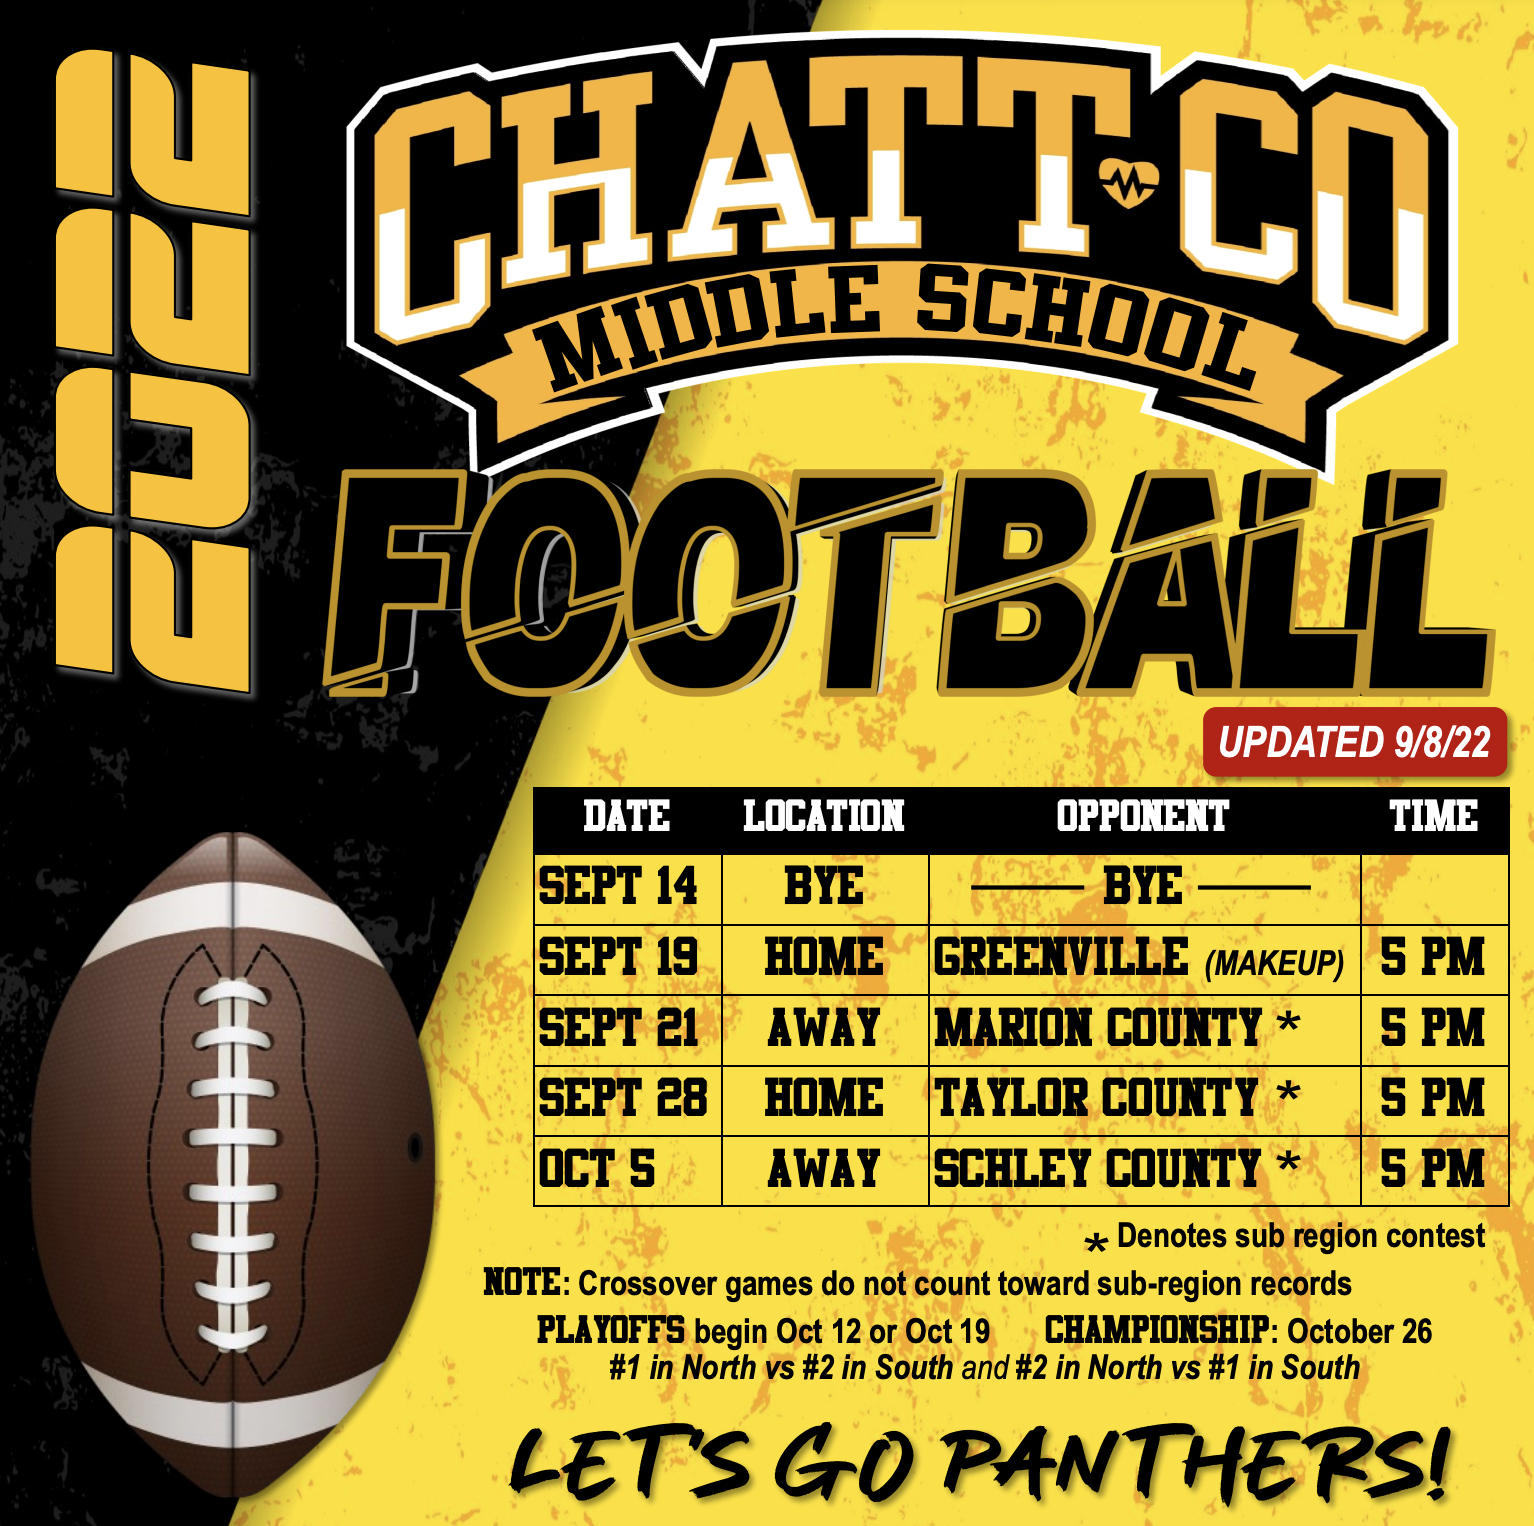 CHATTeD MIDDLE SCHOOL UPDATED 9/8/22 TIME DATE LOCATION OPPONENT S-PT 14 BYE SEPT 19 HOME SEPT 21 AWAY SEPT 28 HOME BYE GREENVILLE (MAKEUP) 5 PM MARION COUNTY * 5 PM TAYLOR COUNTY * 5 PM OCT 5 AWAY SCHLEY COUNTY * 5 PM * Denotes sub region contest NOTE: Crossover games do not count toward sub-region records PLAYOFFS begin Oct 12 or Oct 19 CHAMPIONSHIP: October 26 #1 in North vs #2 in South and #2 in North vs #1 in South LETSGO PANTHERS!